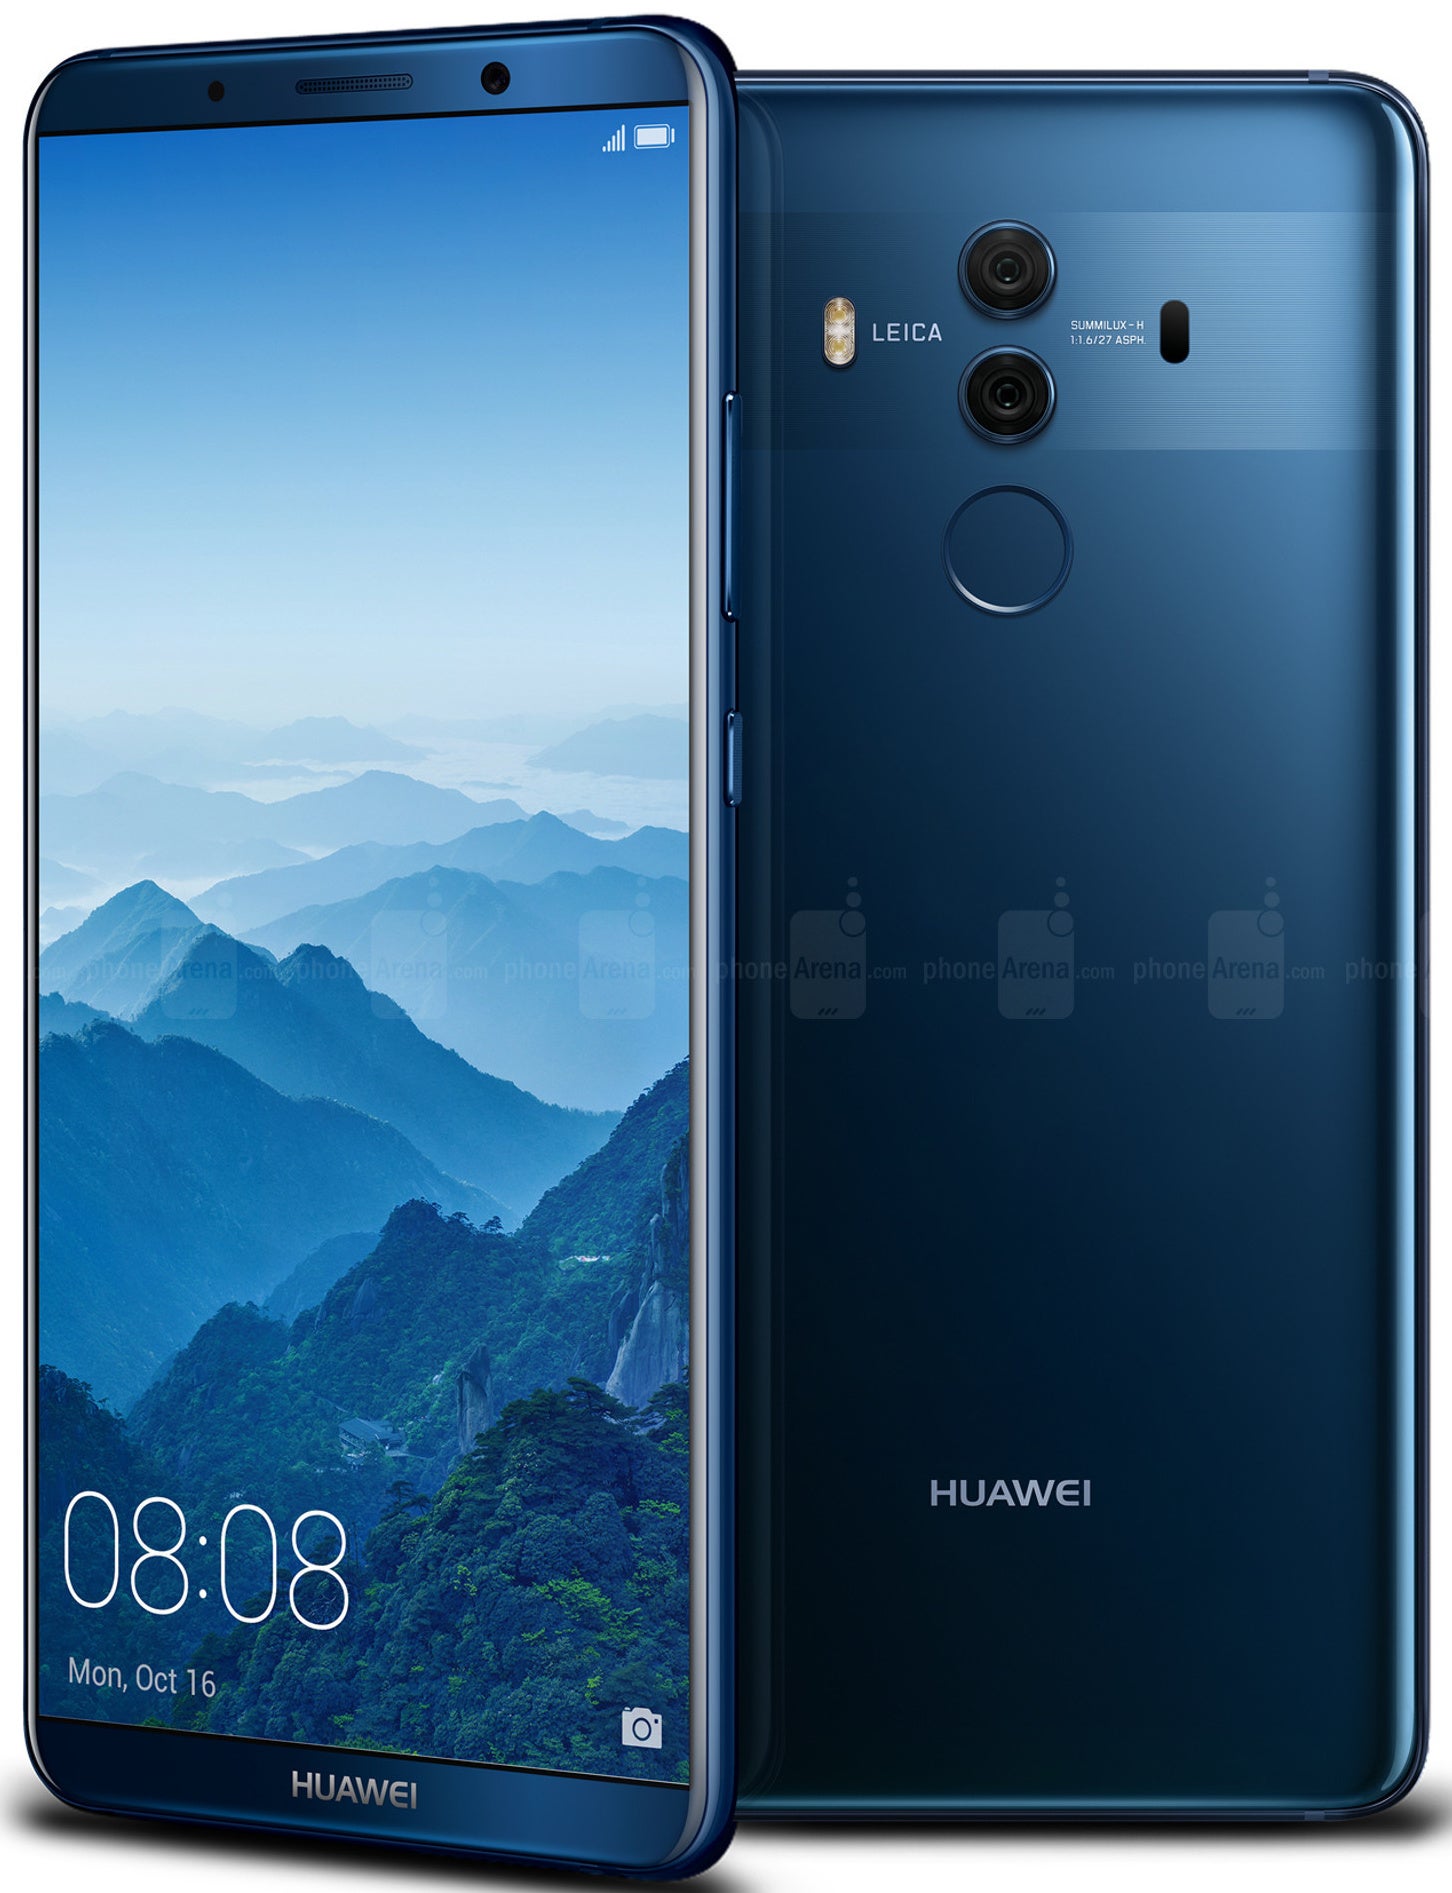 Mate 10 Pro is good, expensive, and Huawei's profit margin on it is as much as Apple's - Do you know who else has Apple's profit margins? Hint: it's not Samsung